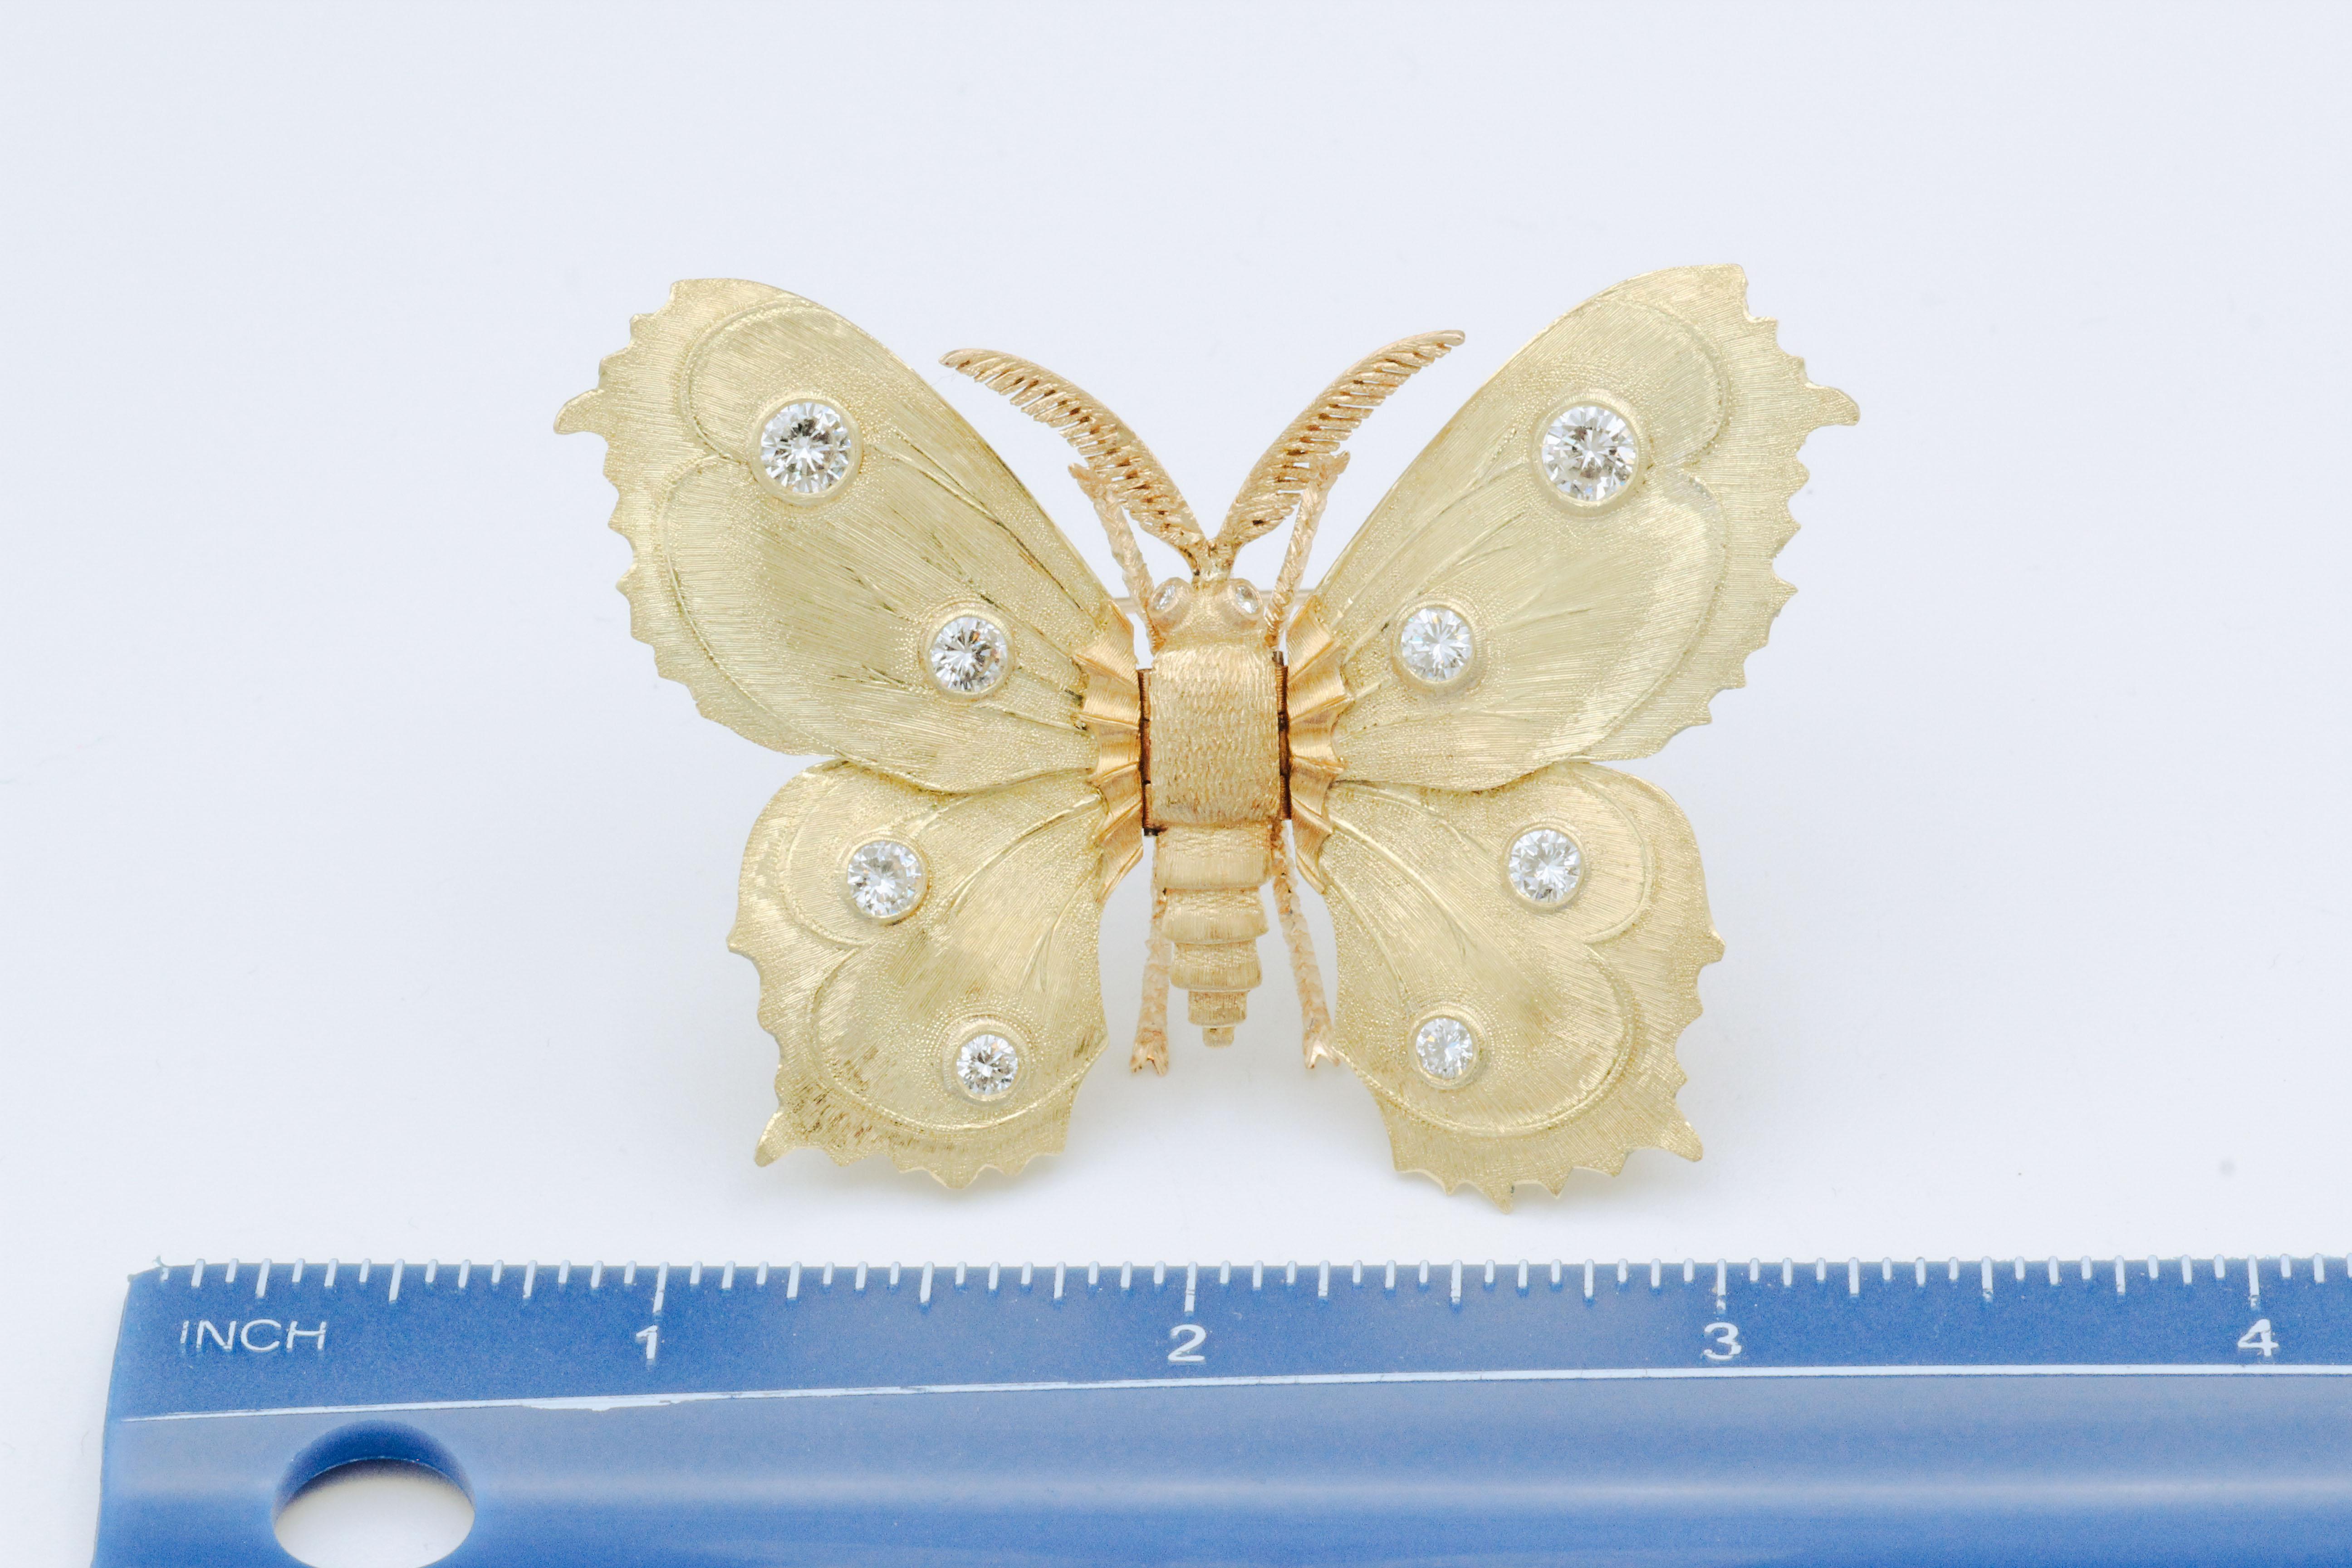 Very fine diamond and 18K yellow gold butterfly brooch by Mario Buccellati. Featuring high grade round brilliant cut diamonds over an 18K gold setting, this beautiful brooch is over 2 inches wide and weighs 27.2 grams. Exceptional workmanship by